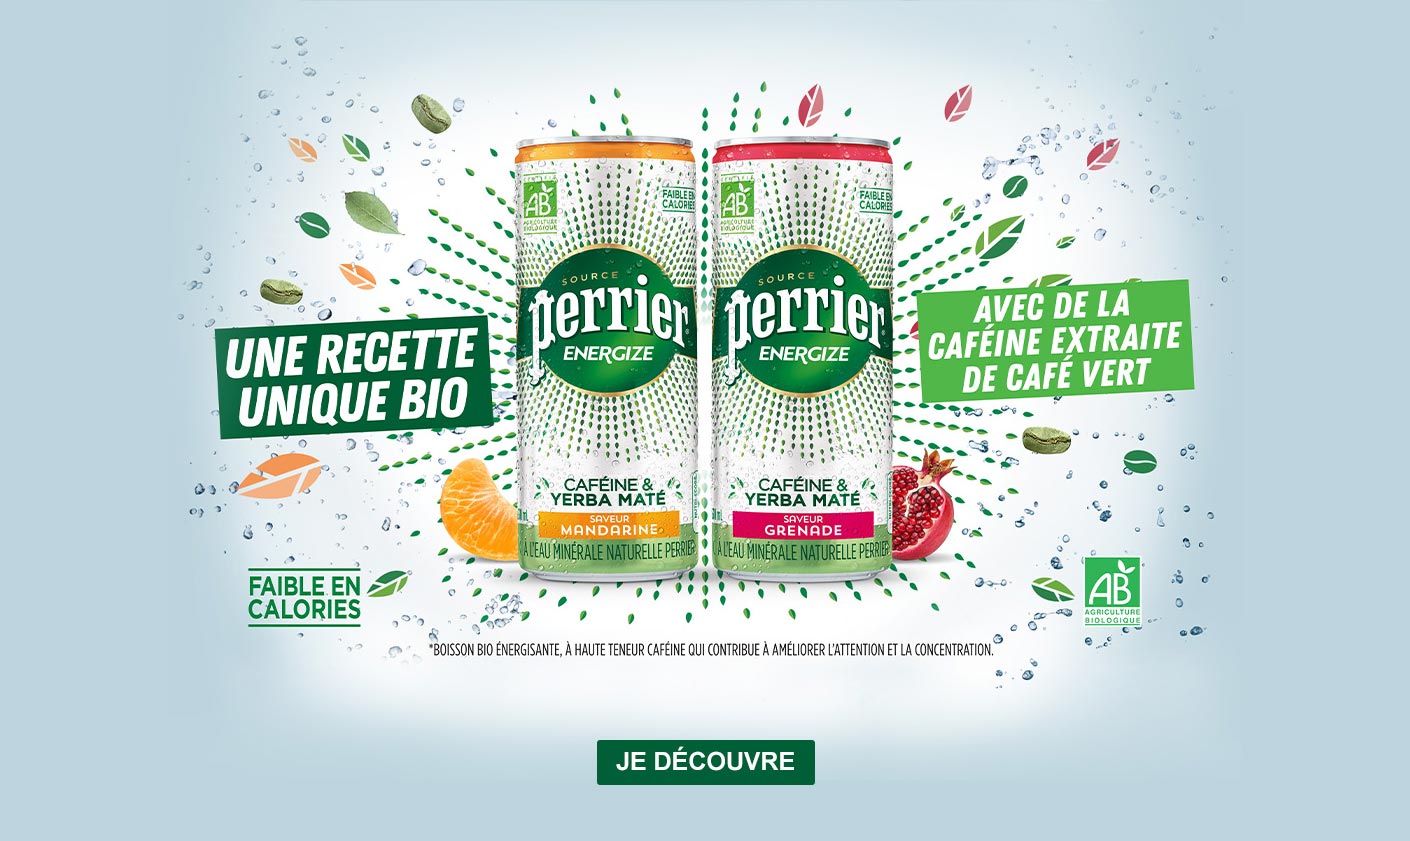 gamme perrier energize